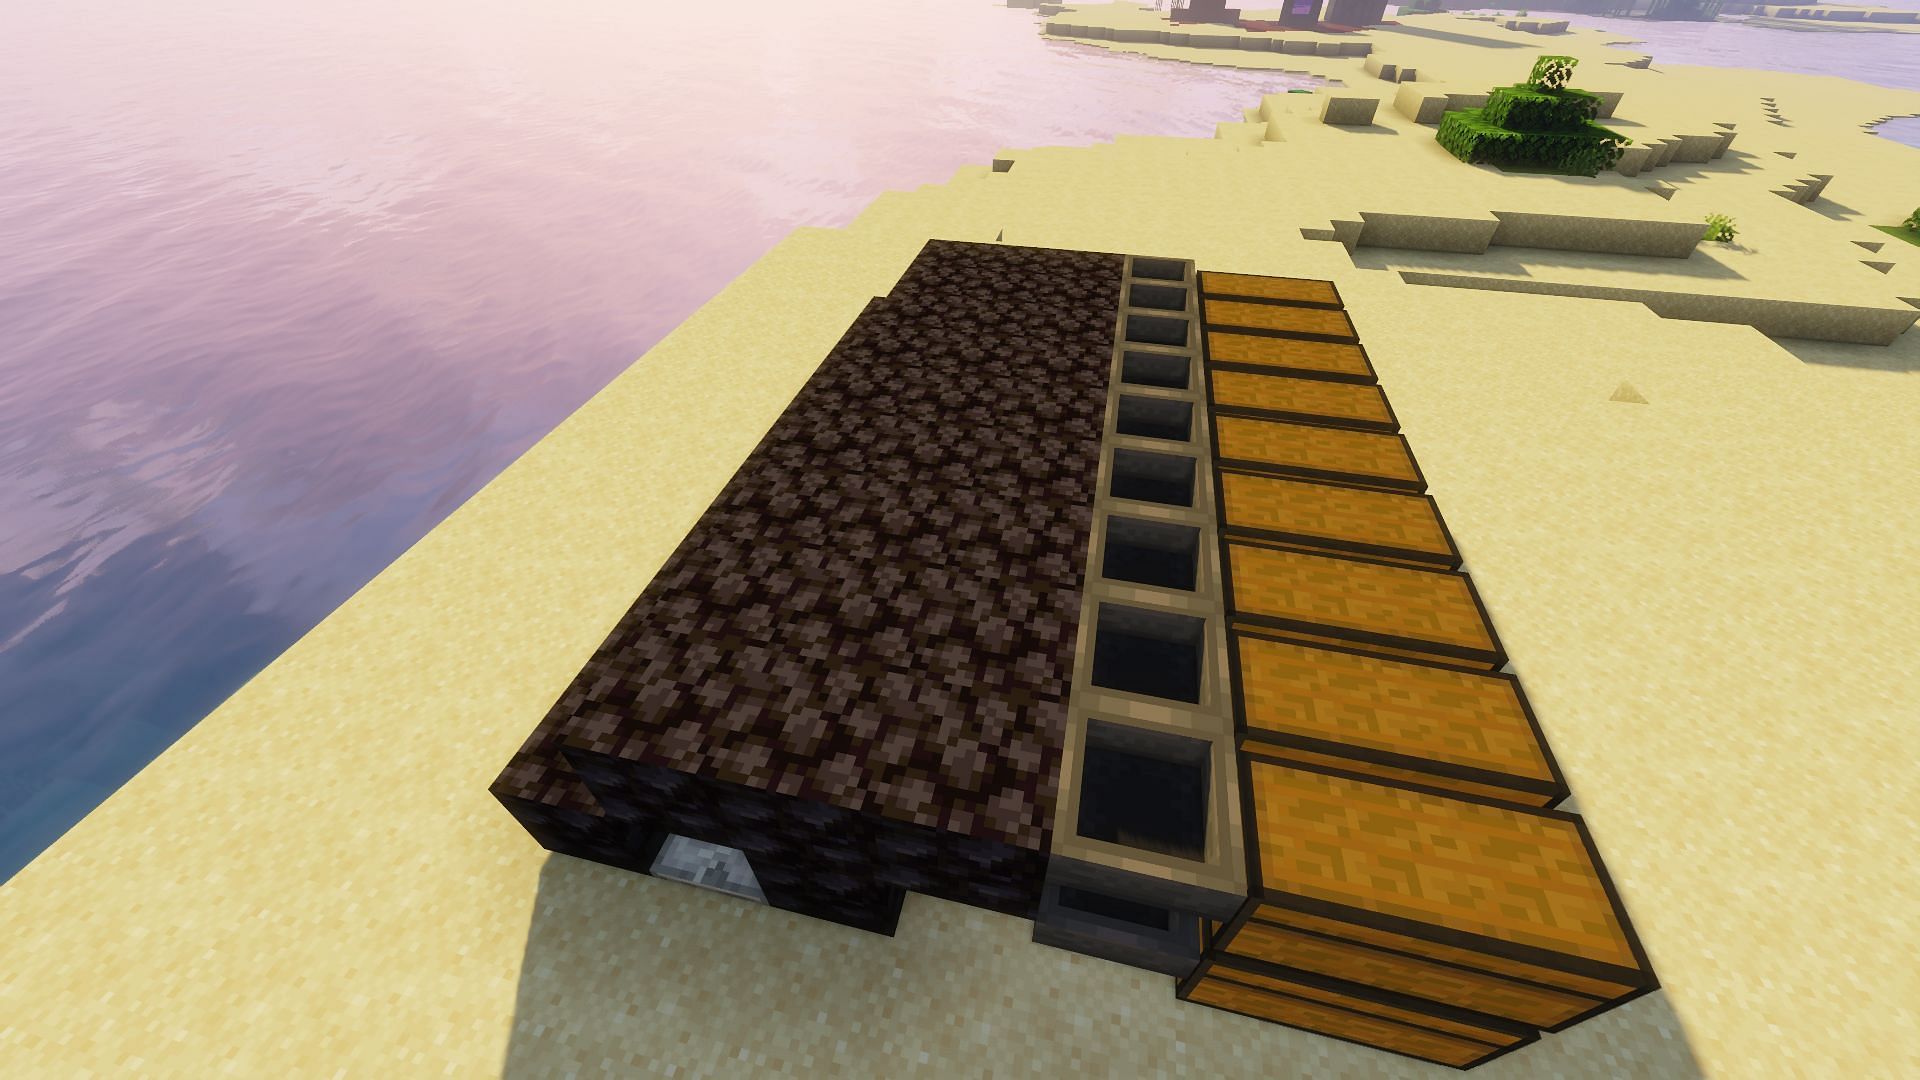 The platform covering the redstone torches and the redstone repeaters (Image via Minecraft)